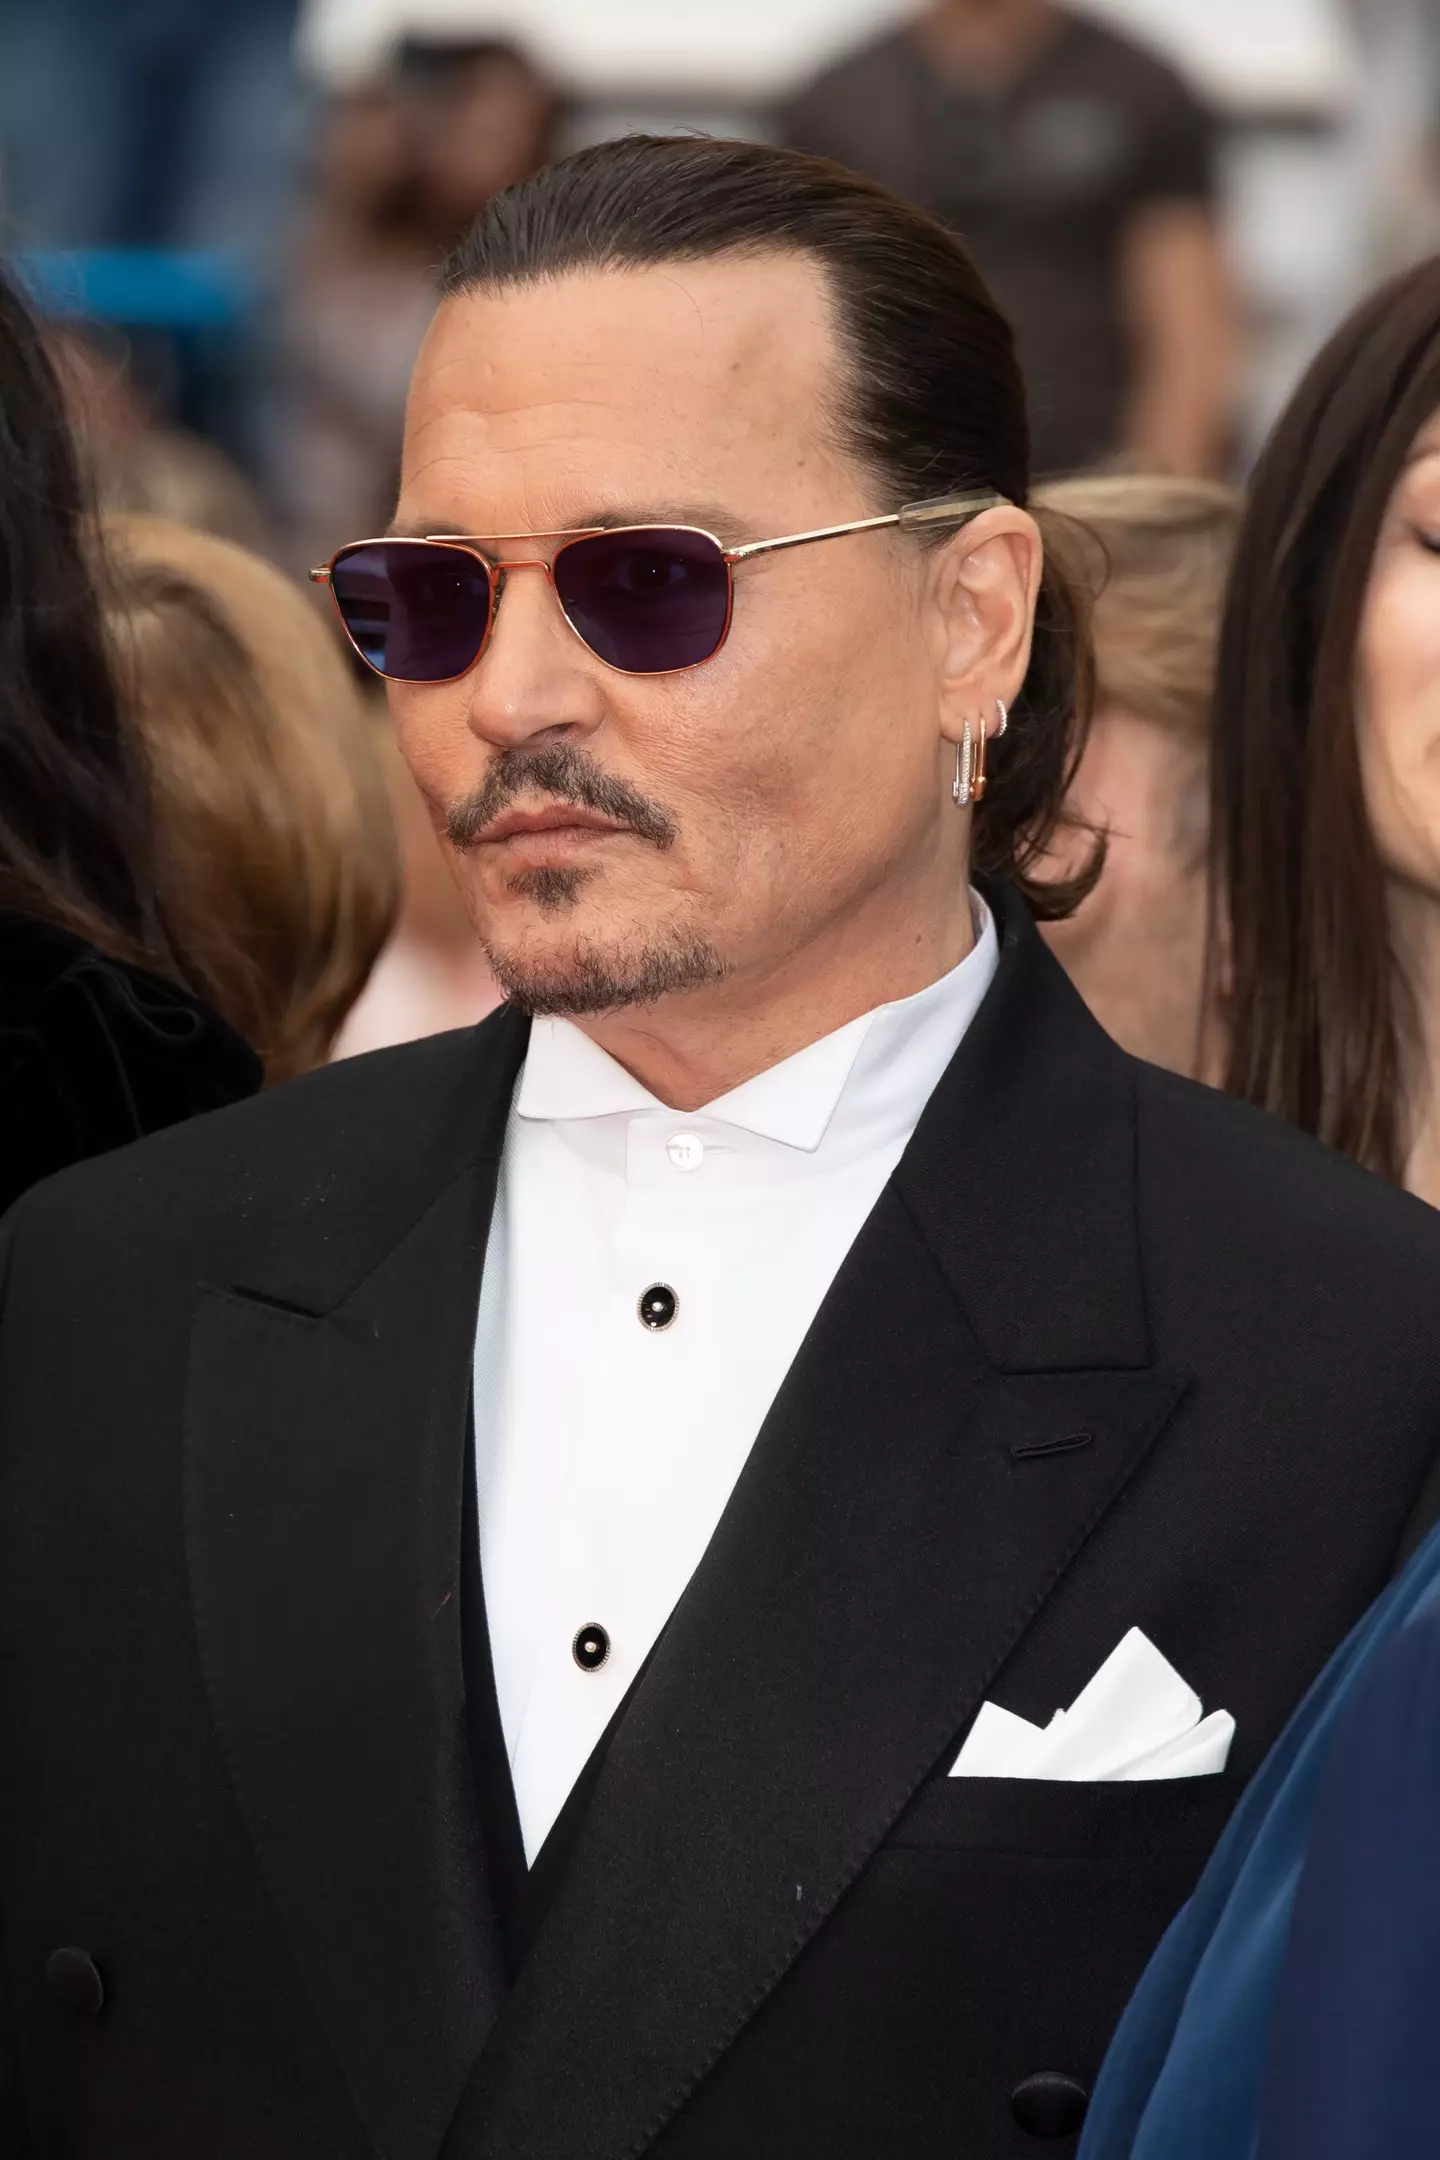 Johnny Depp's reps have also shut down the dating rumours.